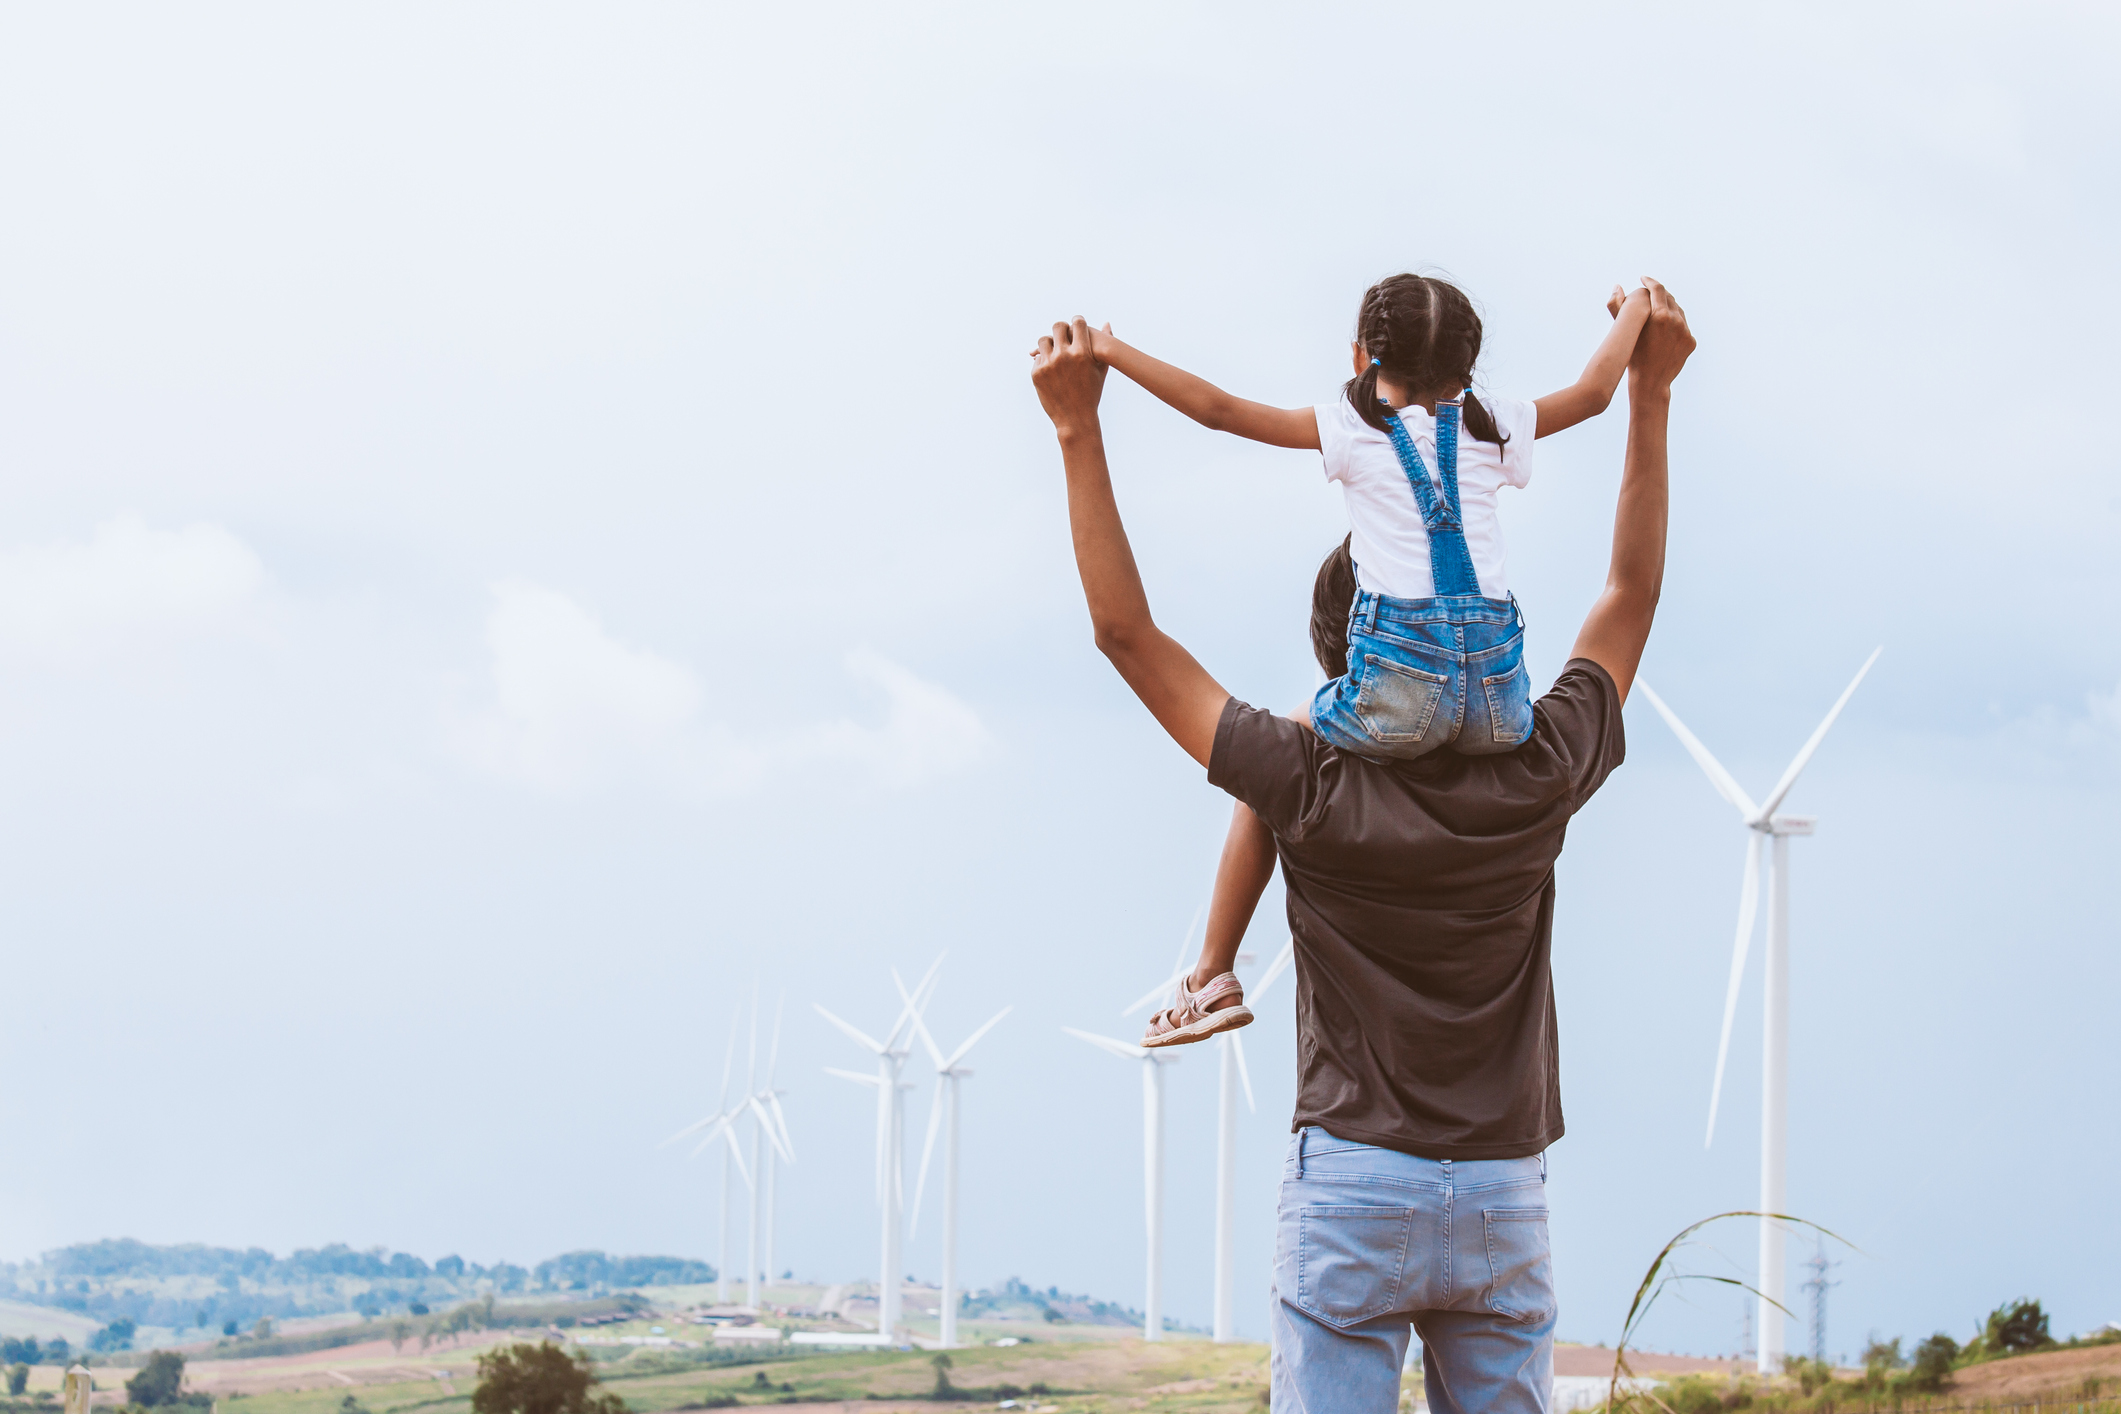 A father and daughter looking over wind turbines in a wind farm producing renewable energy